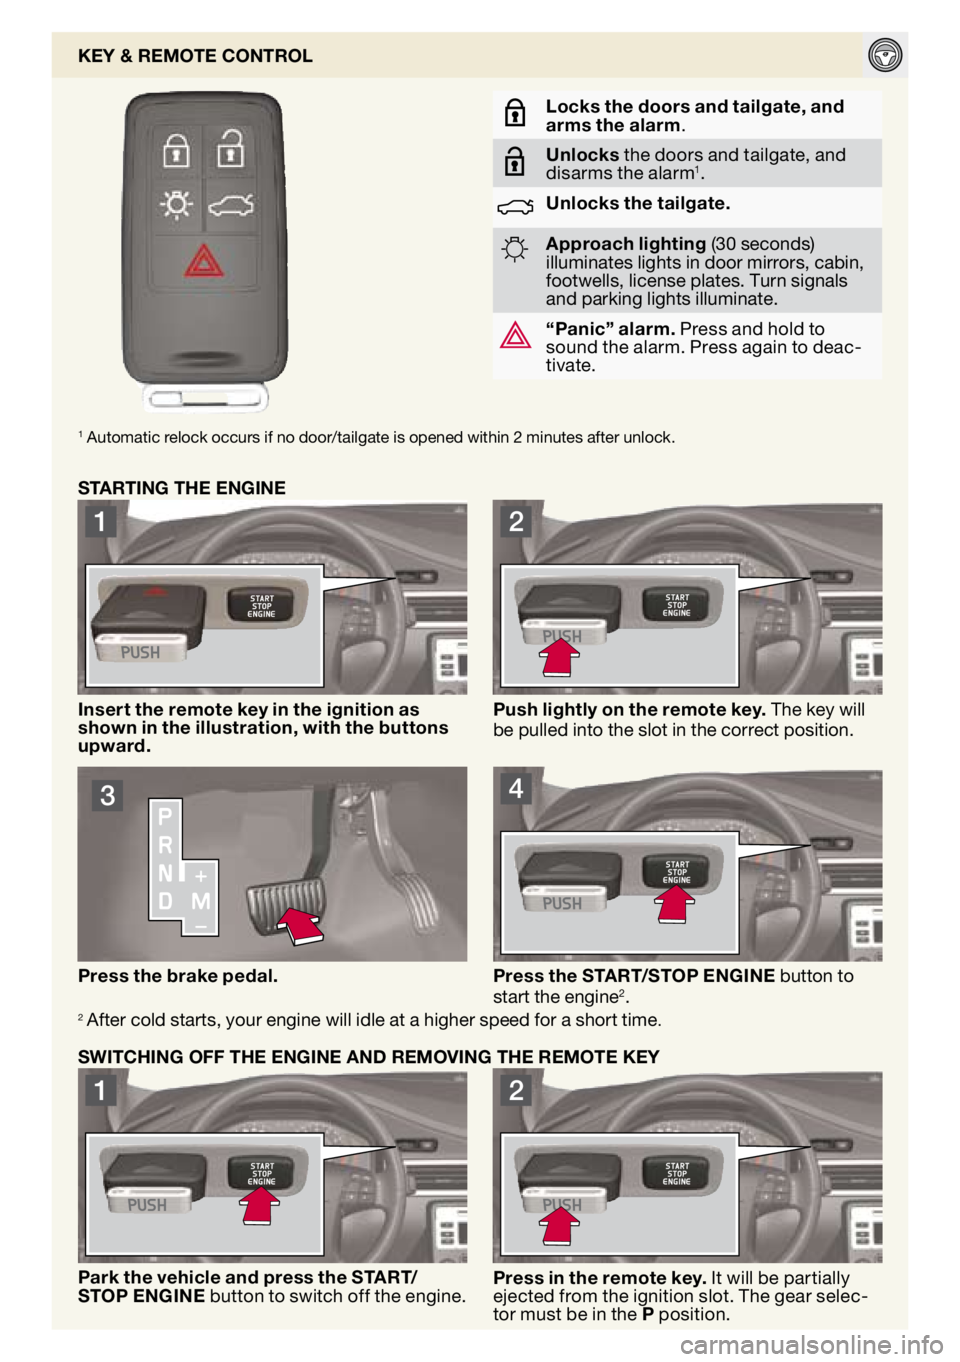 VOLVO XC70 2009  Quick Guide 
1
2

3
4

1
2

key & remote control
locks the doors and tailgate, and arms the alarm.
Unlocks the doors and tailgate, and disarms the alarm1.
Unlocks the tailgate.
Approach lighting (30 seconds) illu